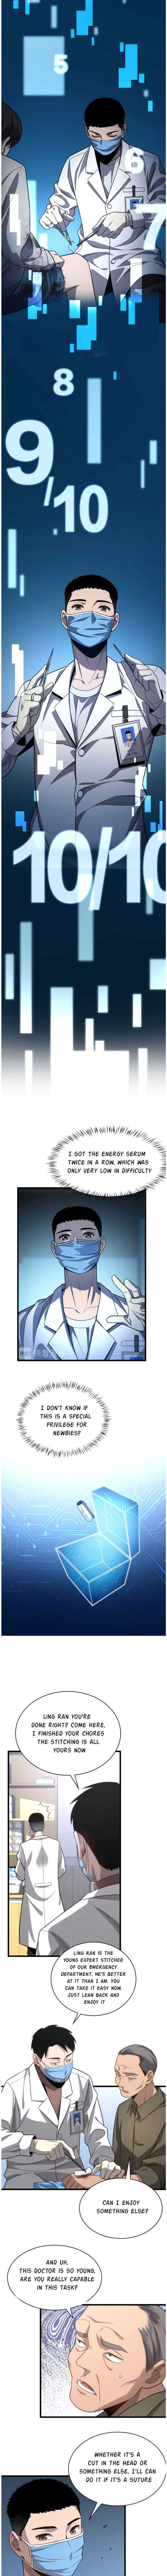 great_doctor_ling_ran_8_6